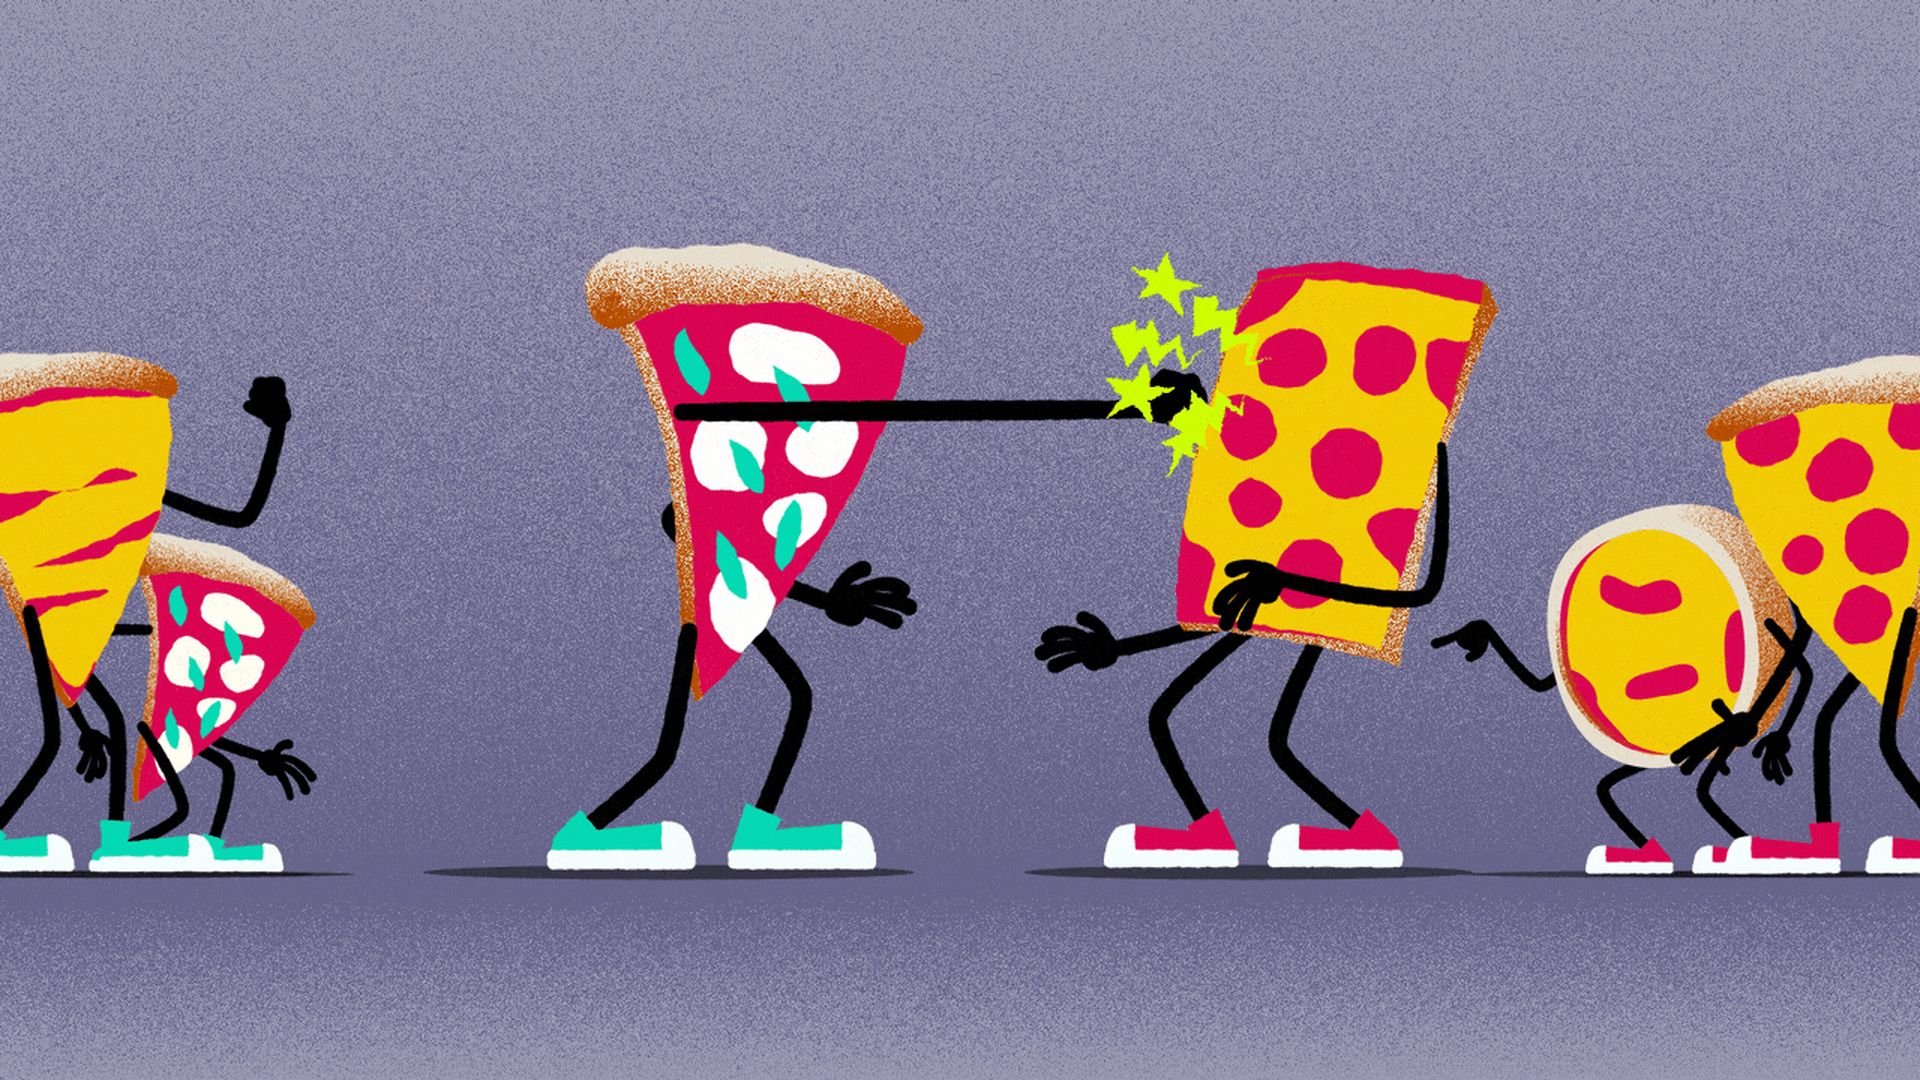 two slices of pizza fist fight each other